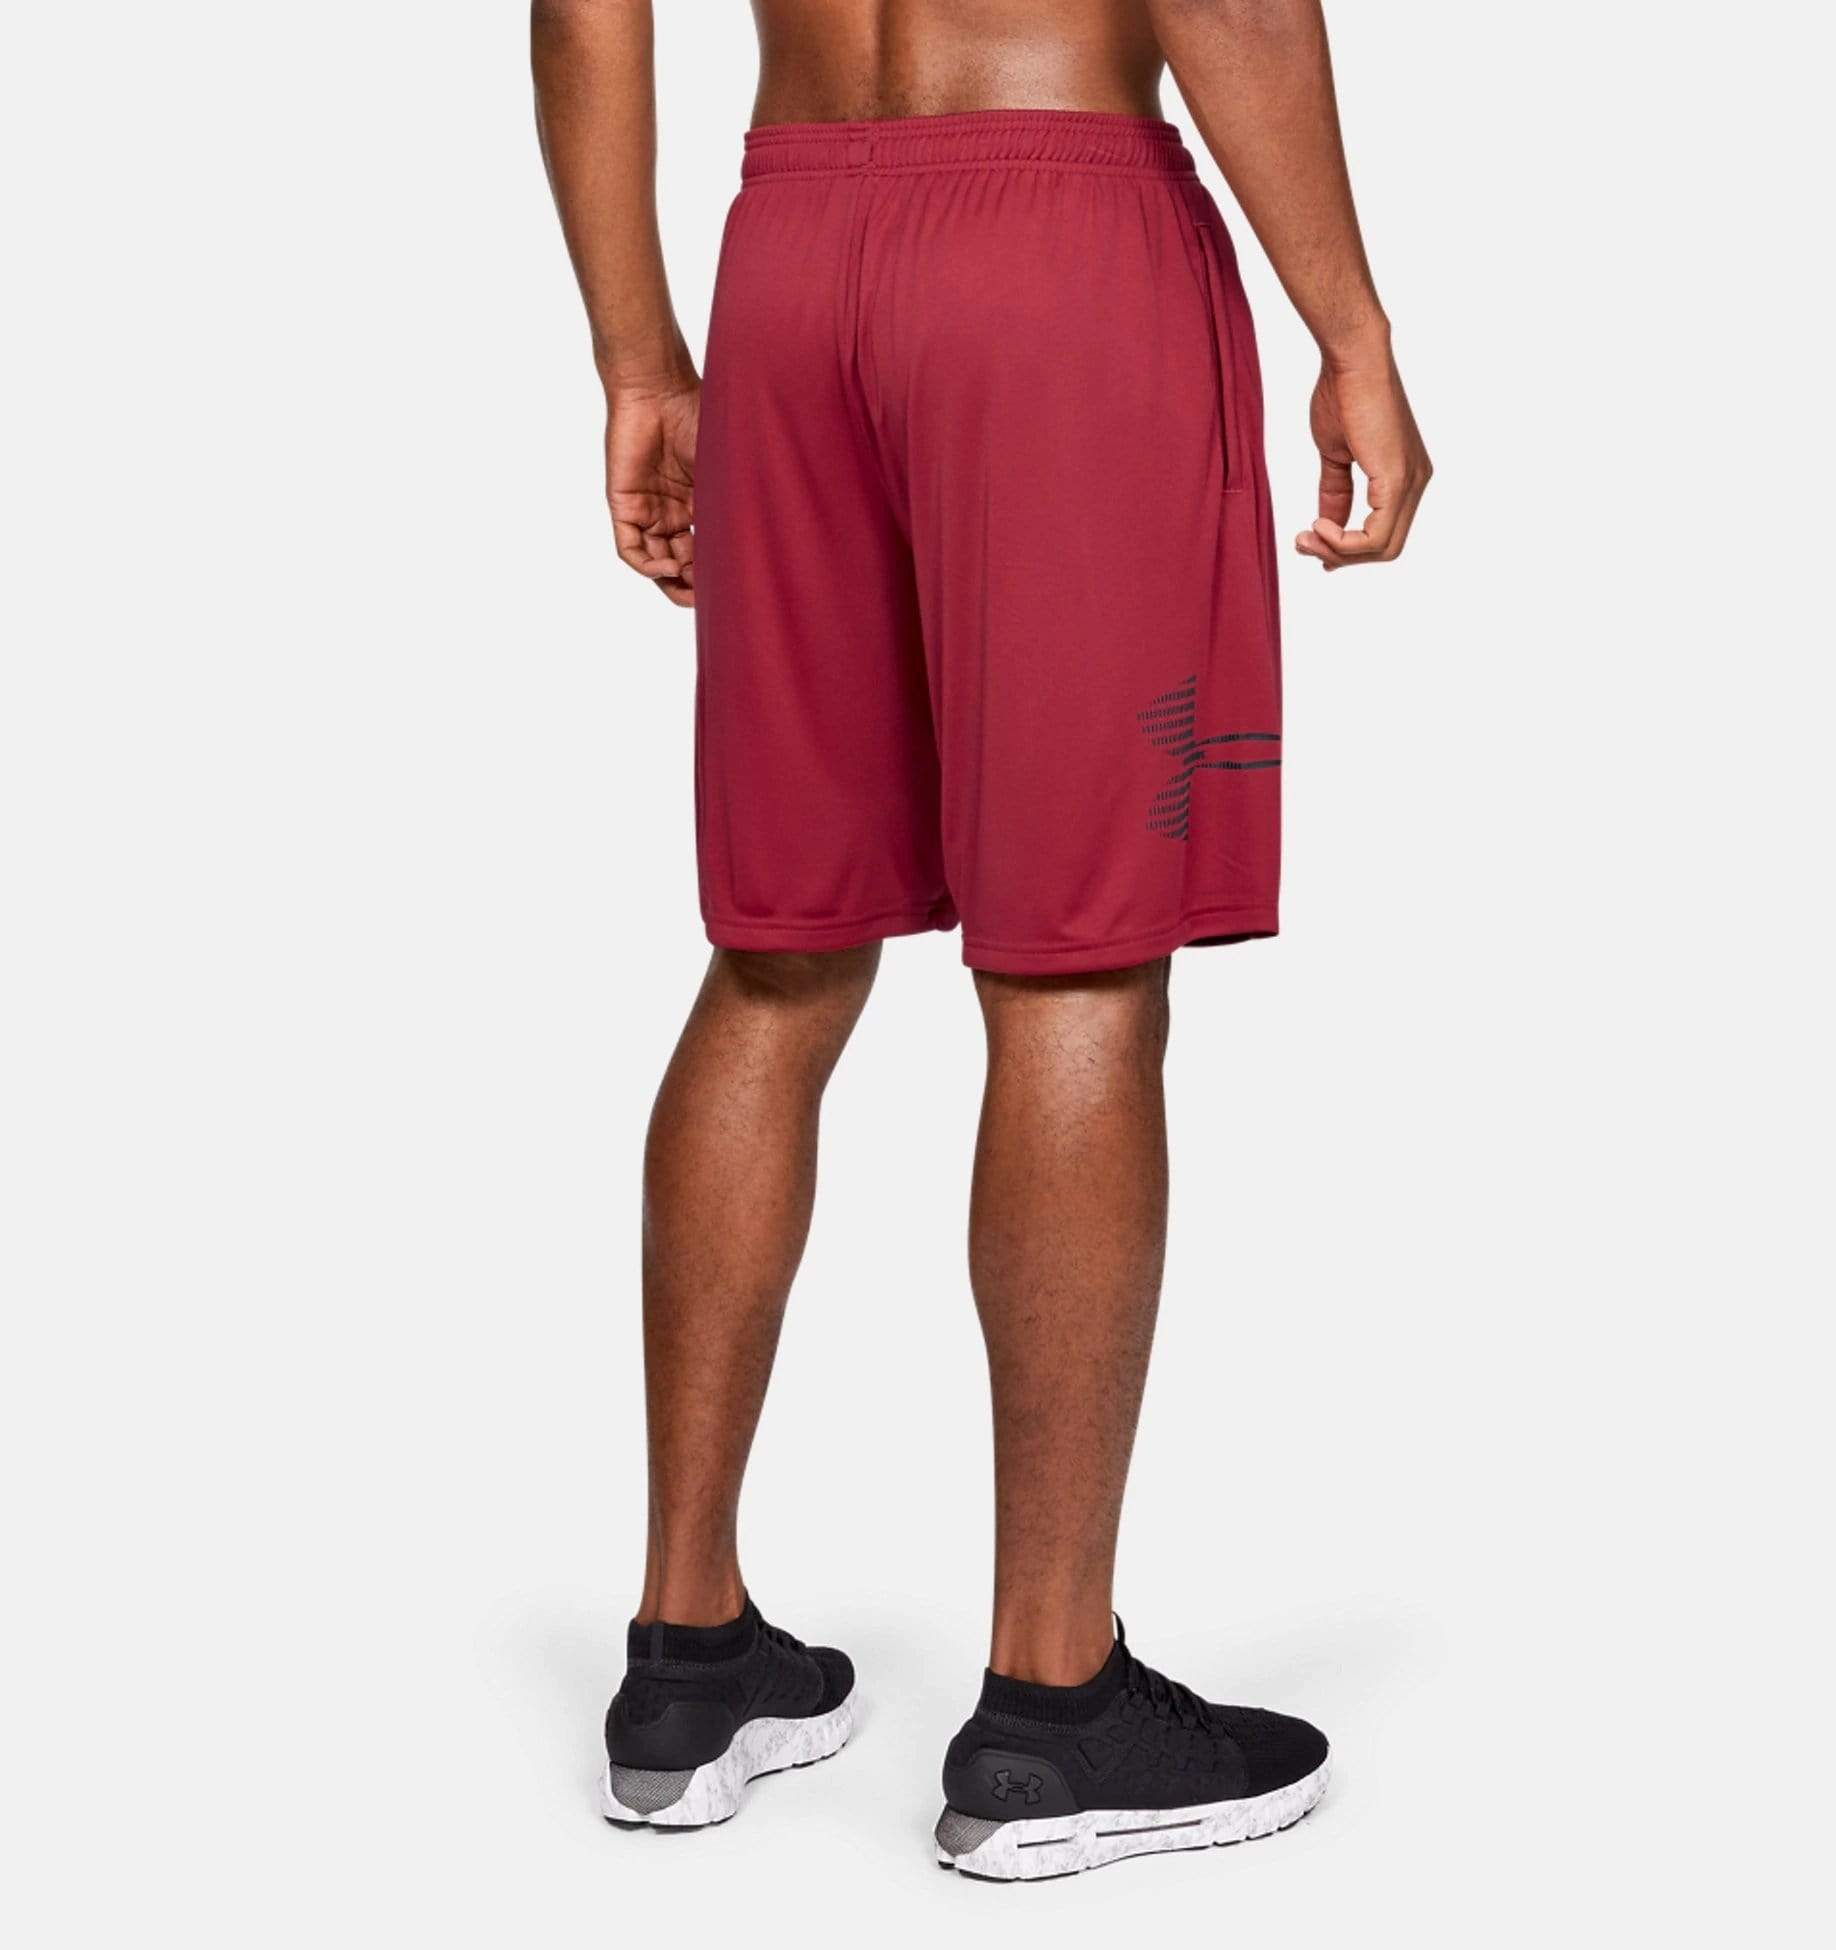 UNDER ARMOUR Mens sports Large UA Tech Graphic Shorts